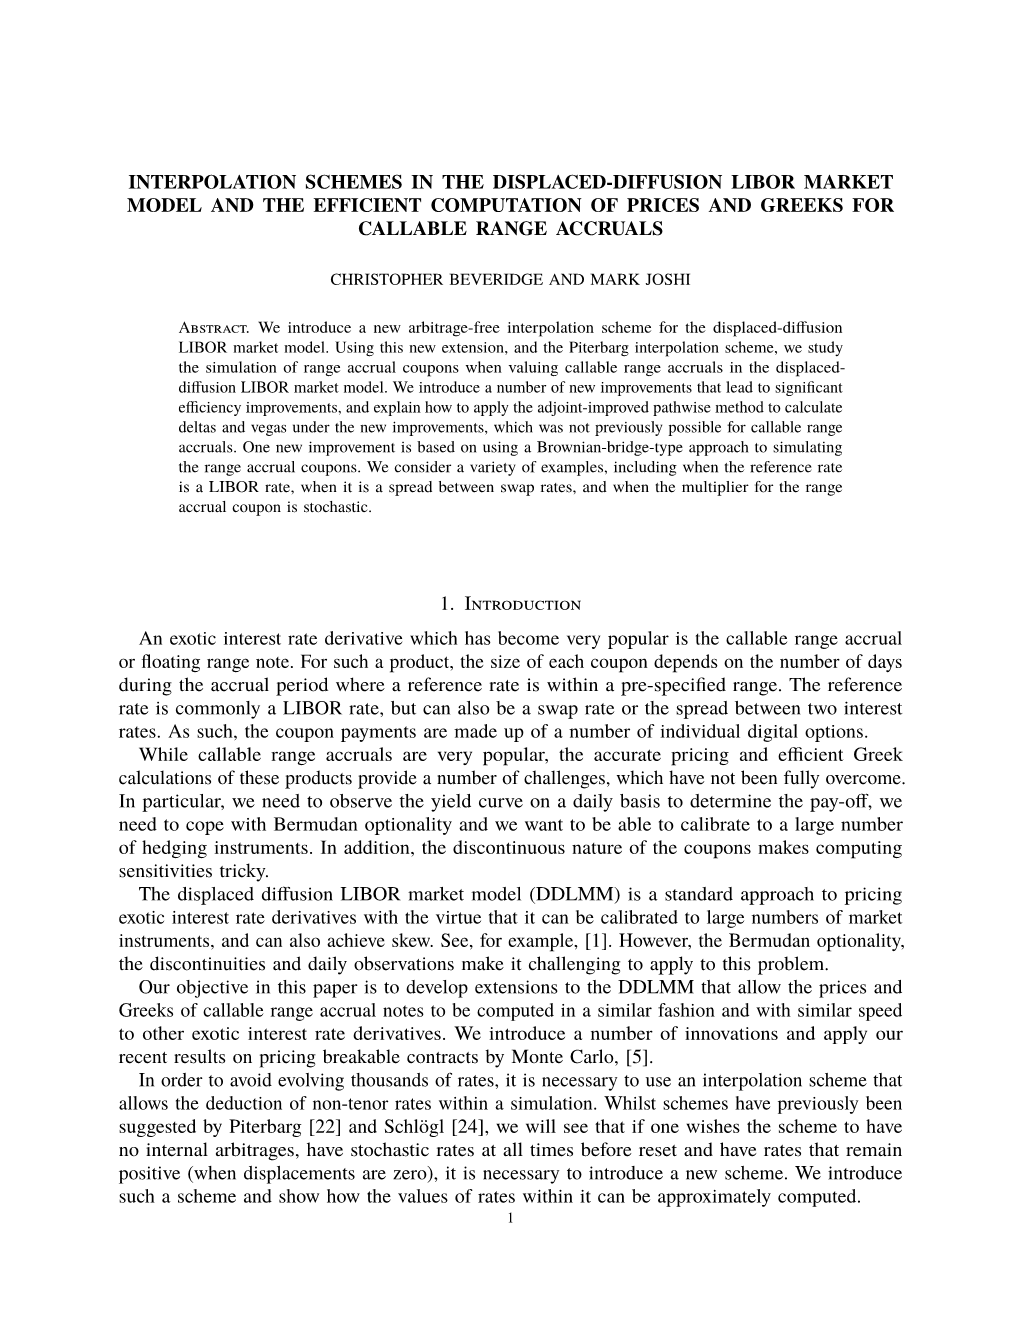 Interpolation Schemes in the Displaced-Diffusion Libor Market Model and the Efficient Computation of Prices and Greeks for Callable Range Accruals